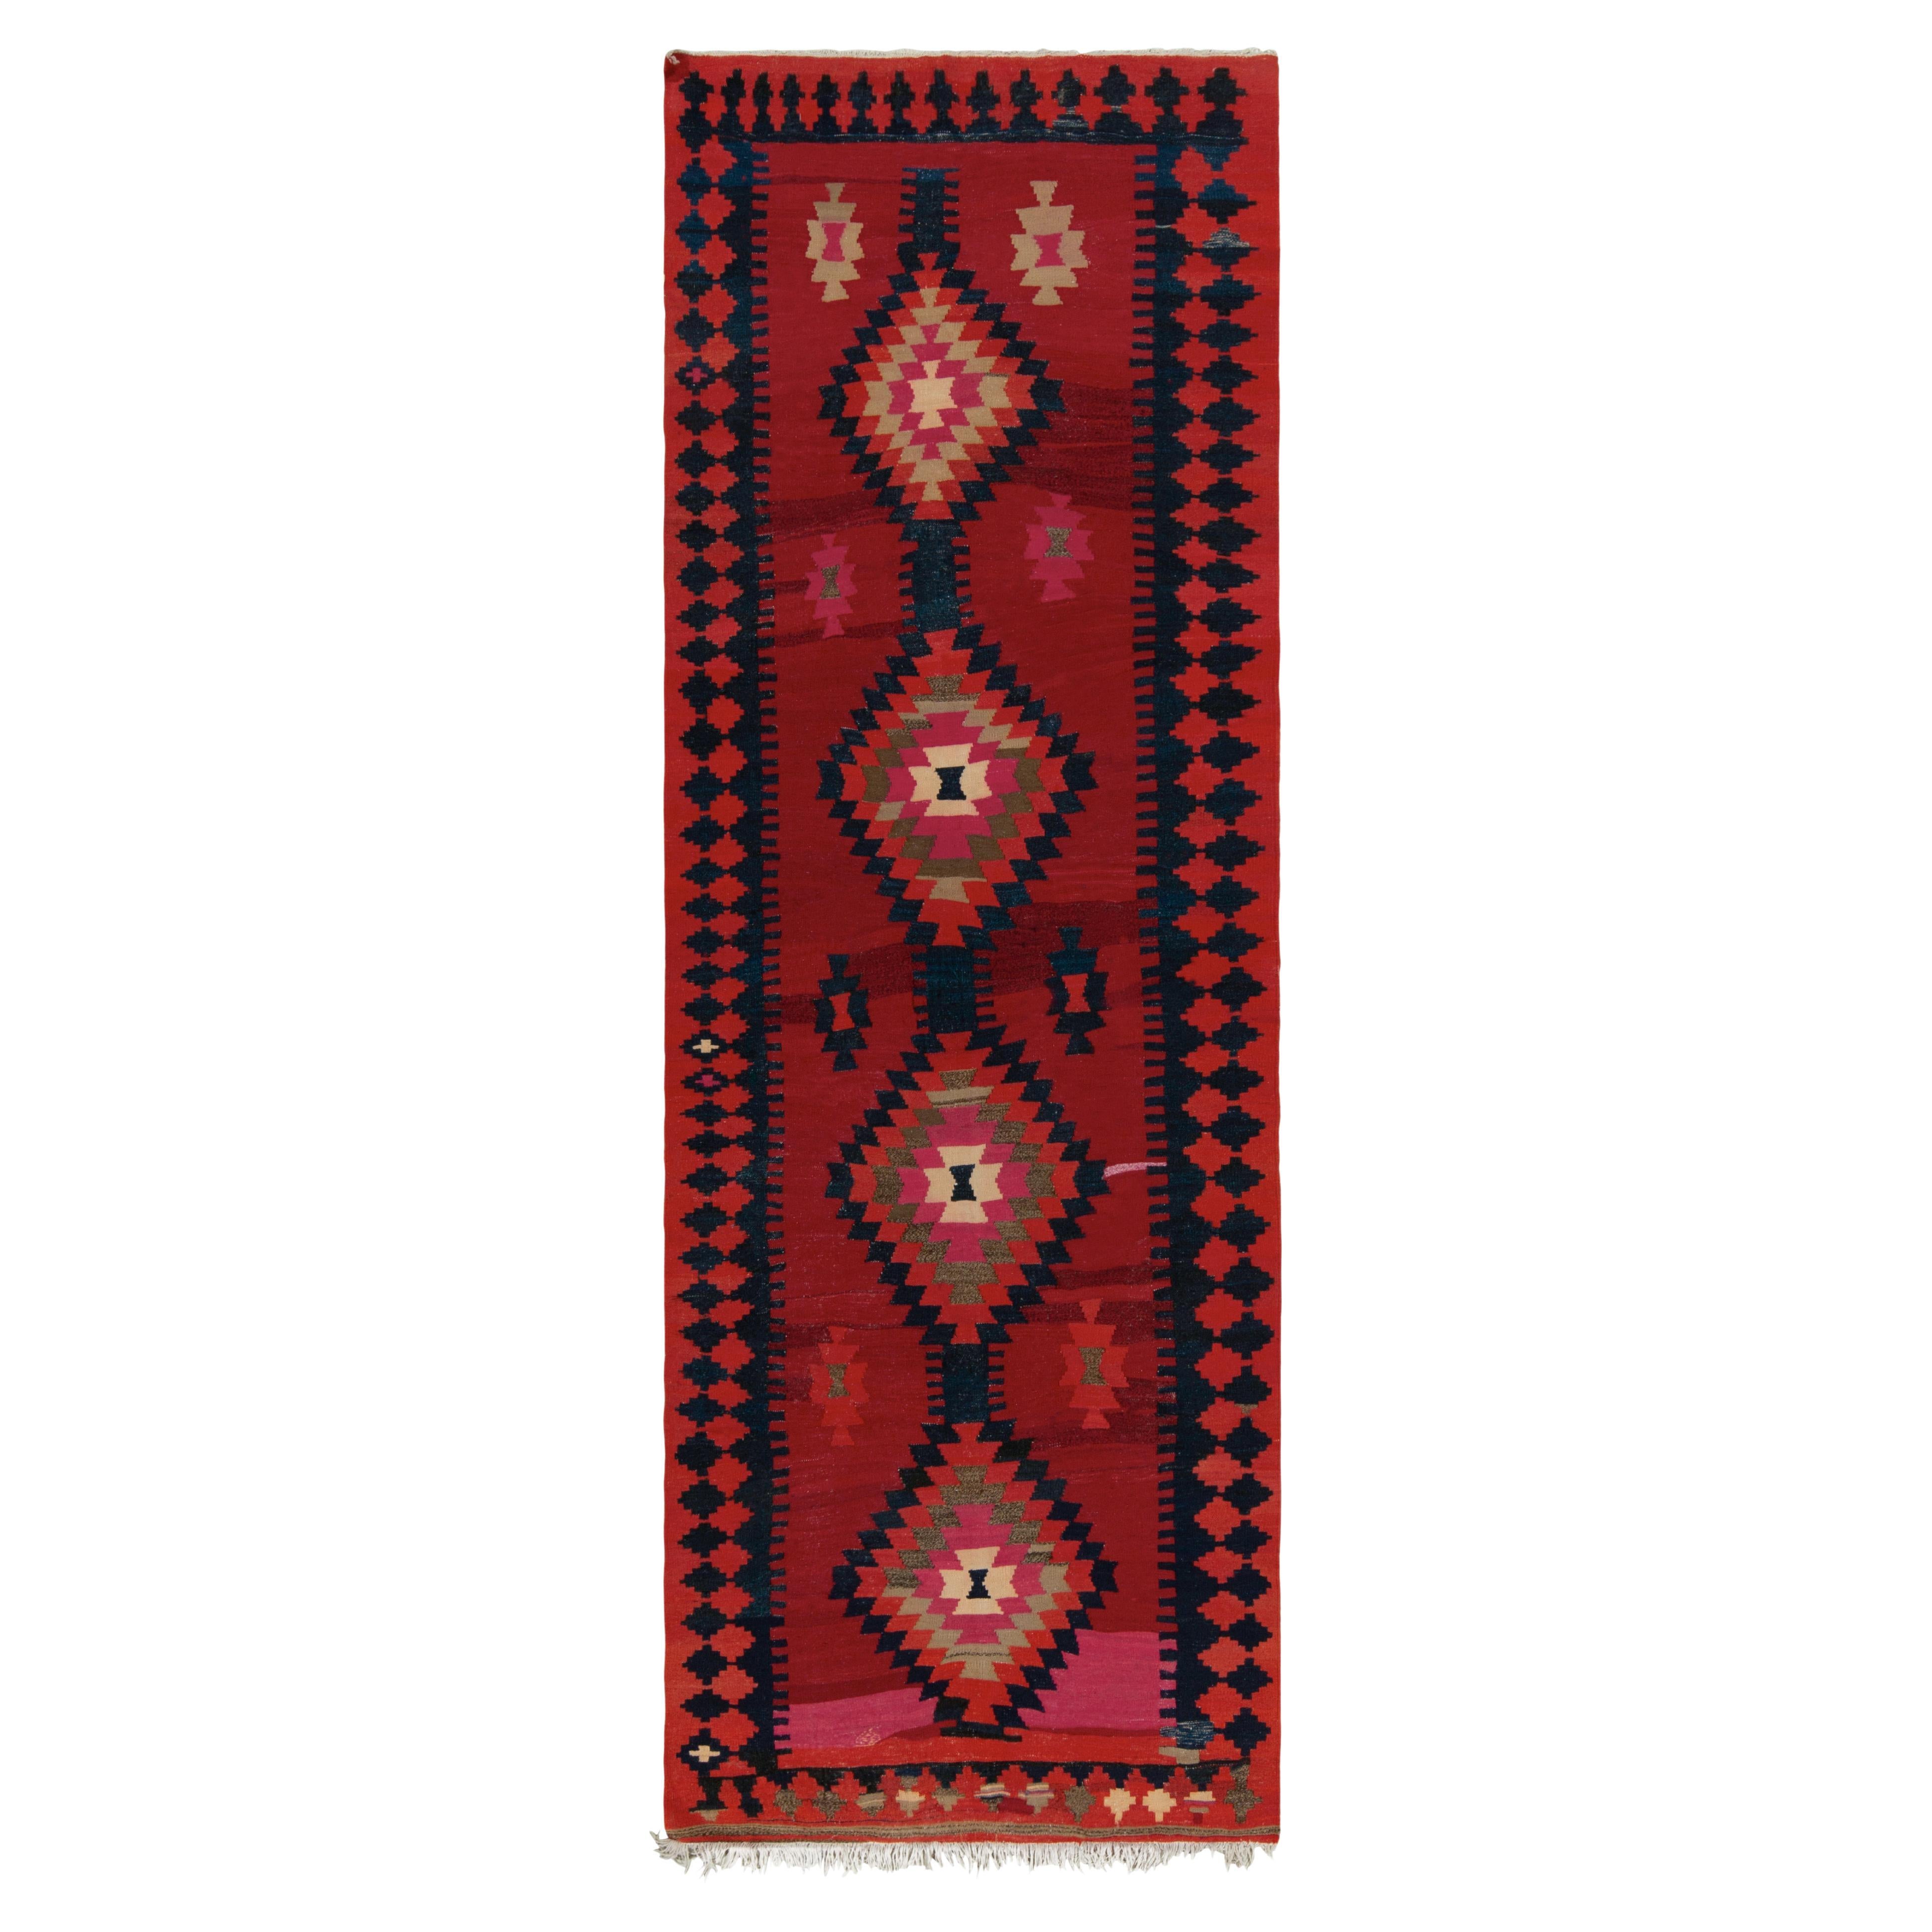 1910s Antique Persian Kilim Red & Pink Tribal Geometric Pattern by Rug & Kilim For Sale